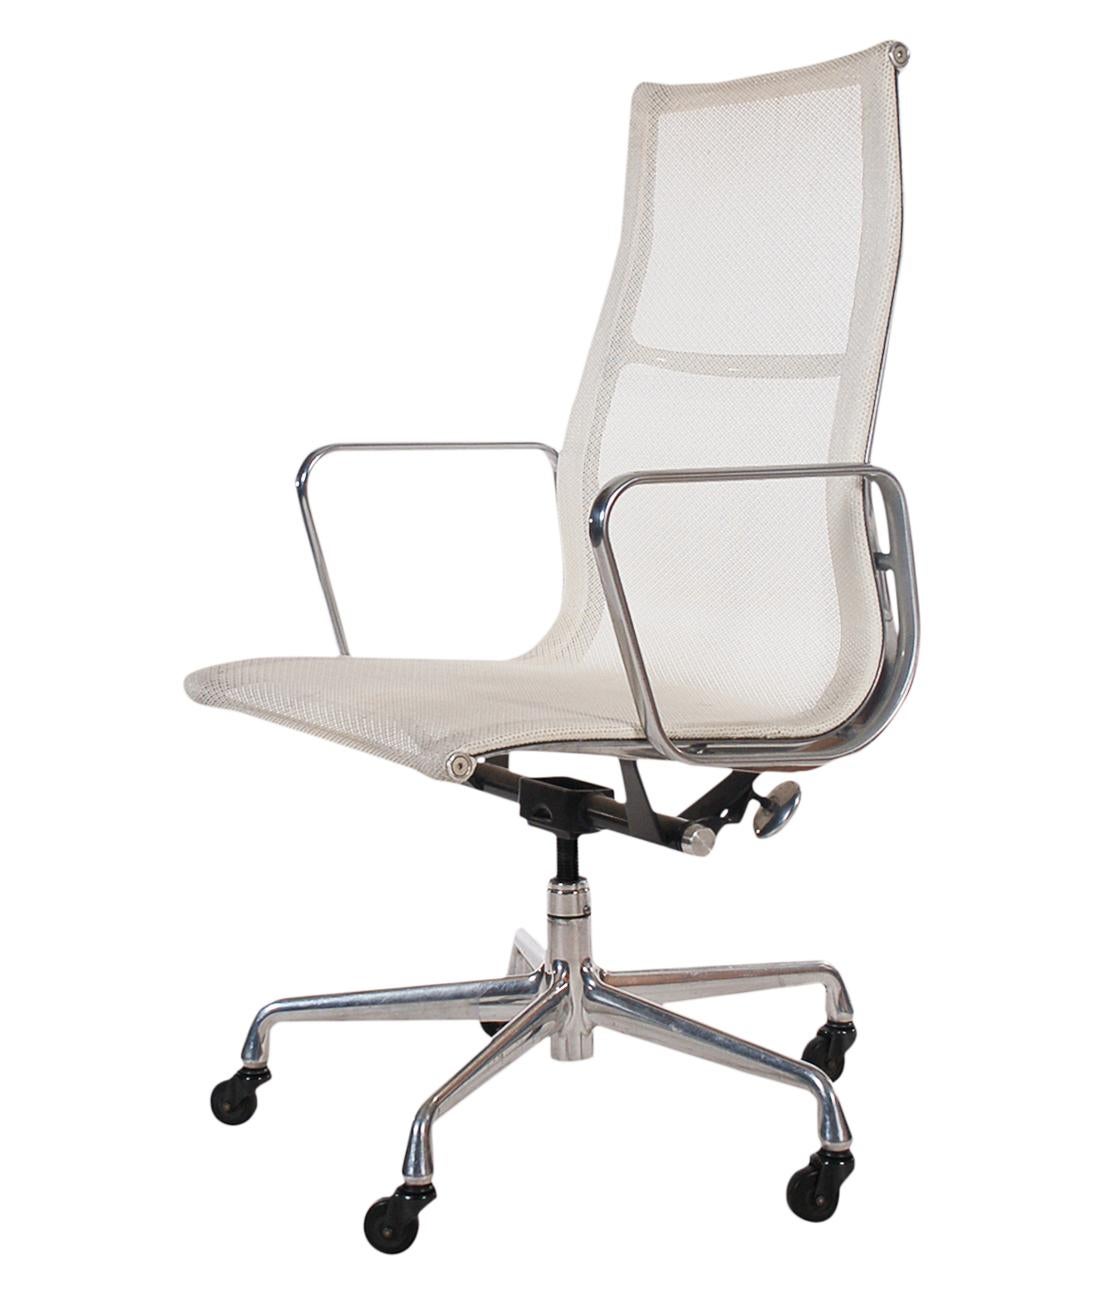 Set of Four Charles Eames for Herman Miller White Conference Room Office Chairs 2